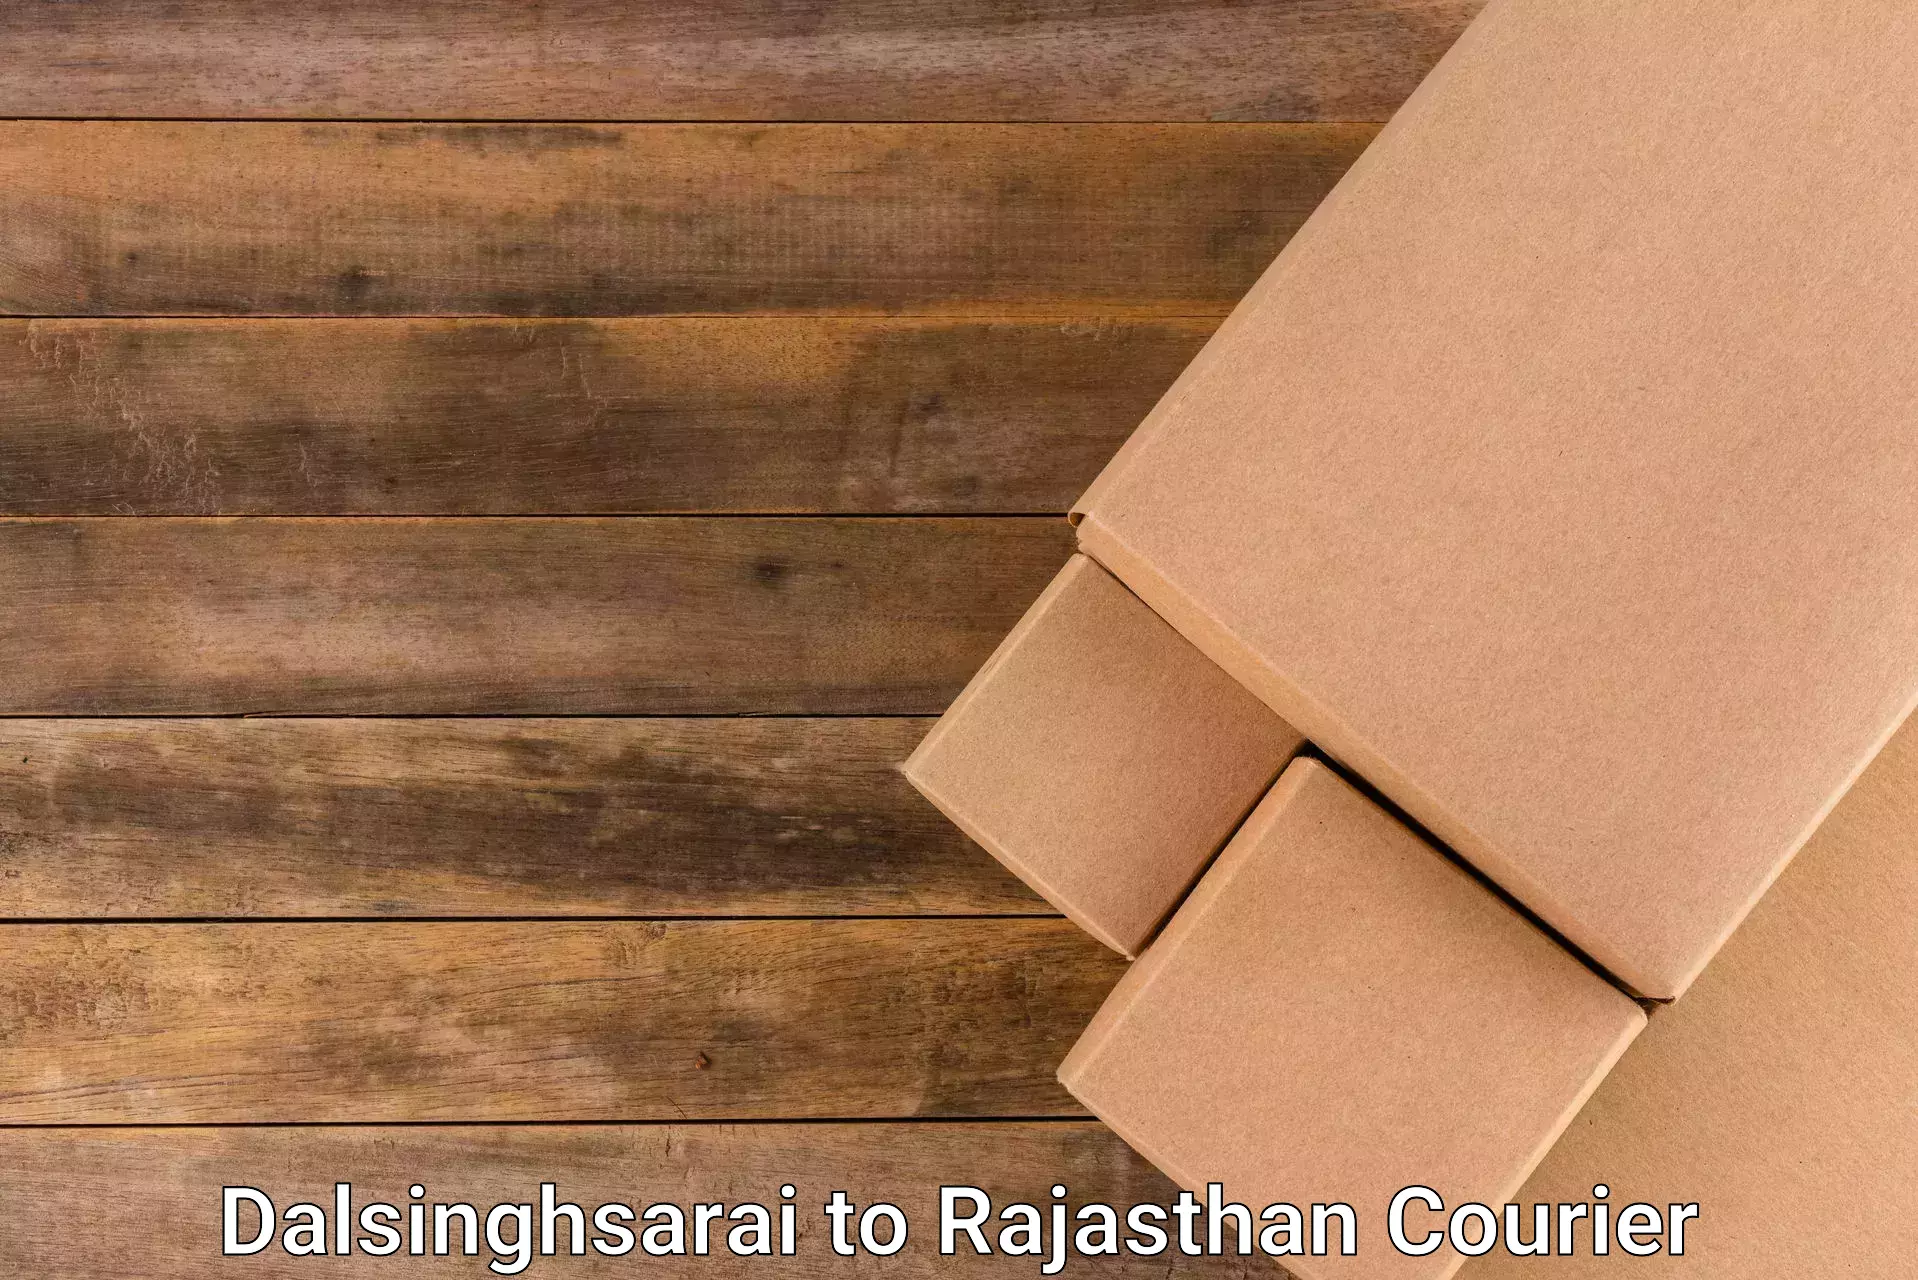 Fast-track shipping solutions in Dalsinghsarai to Jaipur